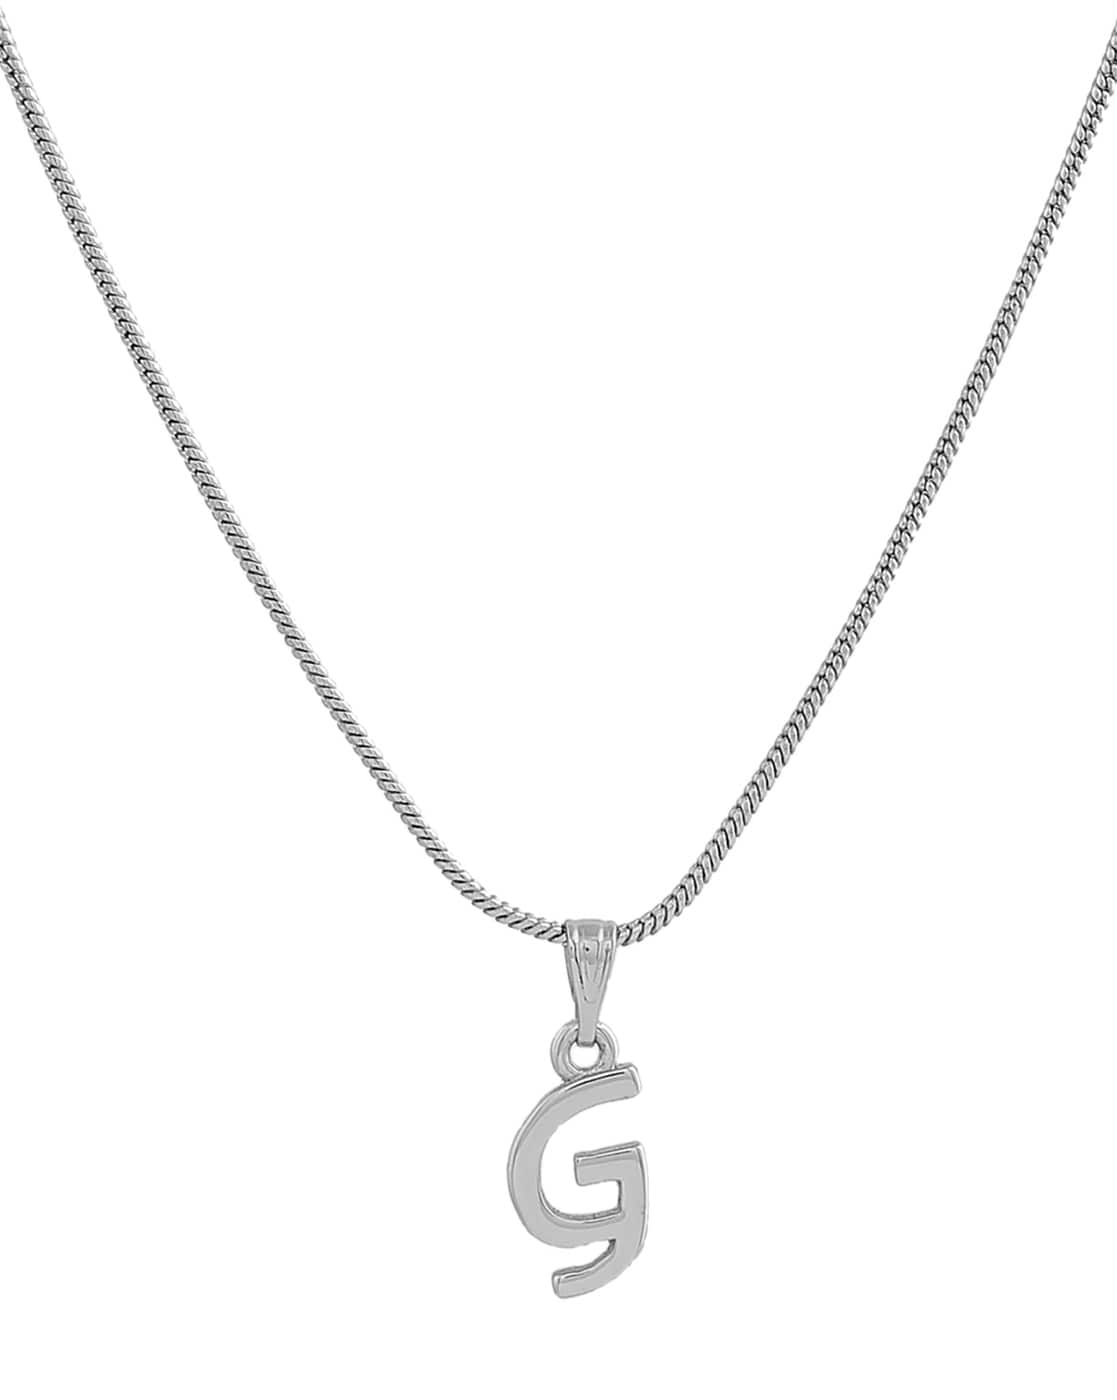 Polo 'G' Necklace – Jewelry Designs by ACE ™